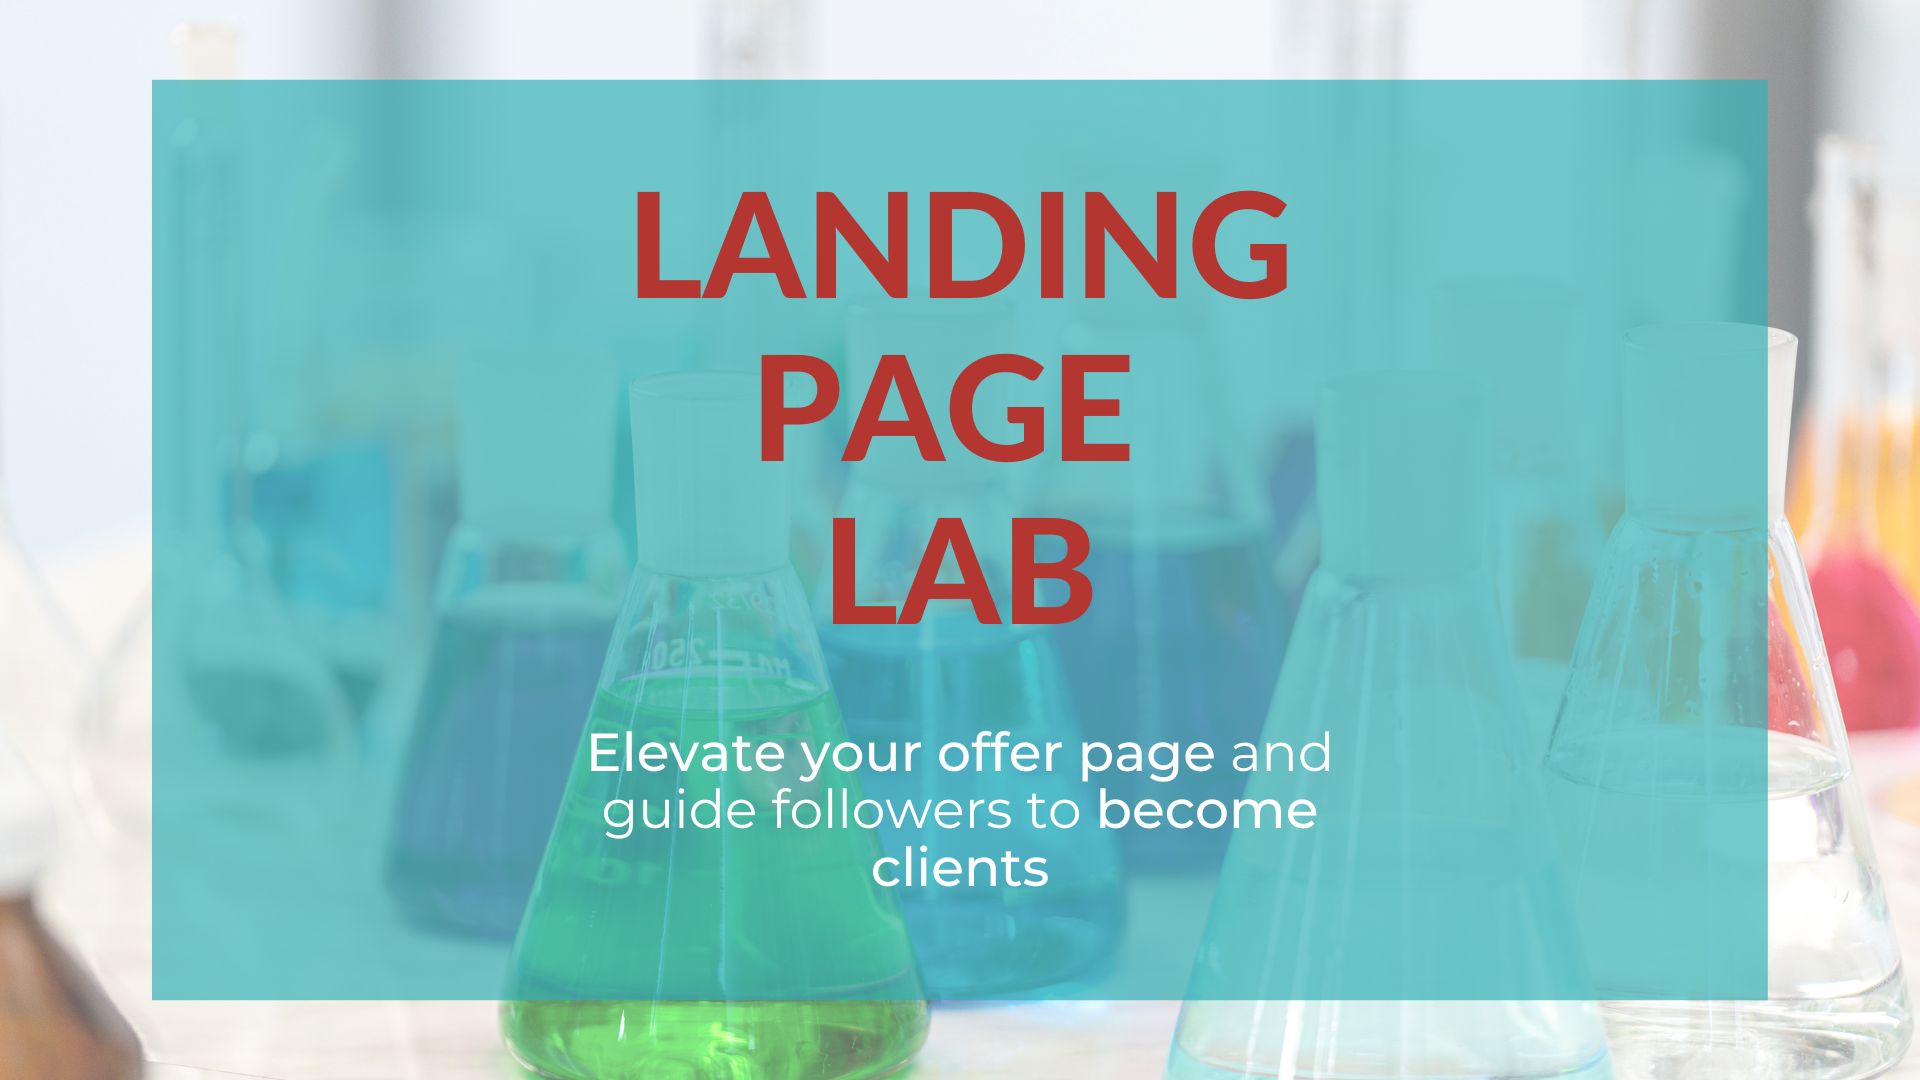 Landing Page Lab - A Copywriting Workshop for Entrepreneurs Who Launch Amazing Services and Offers